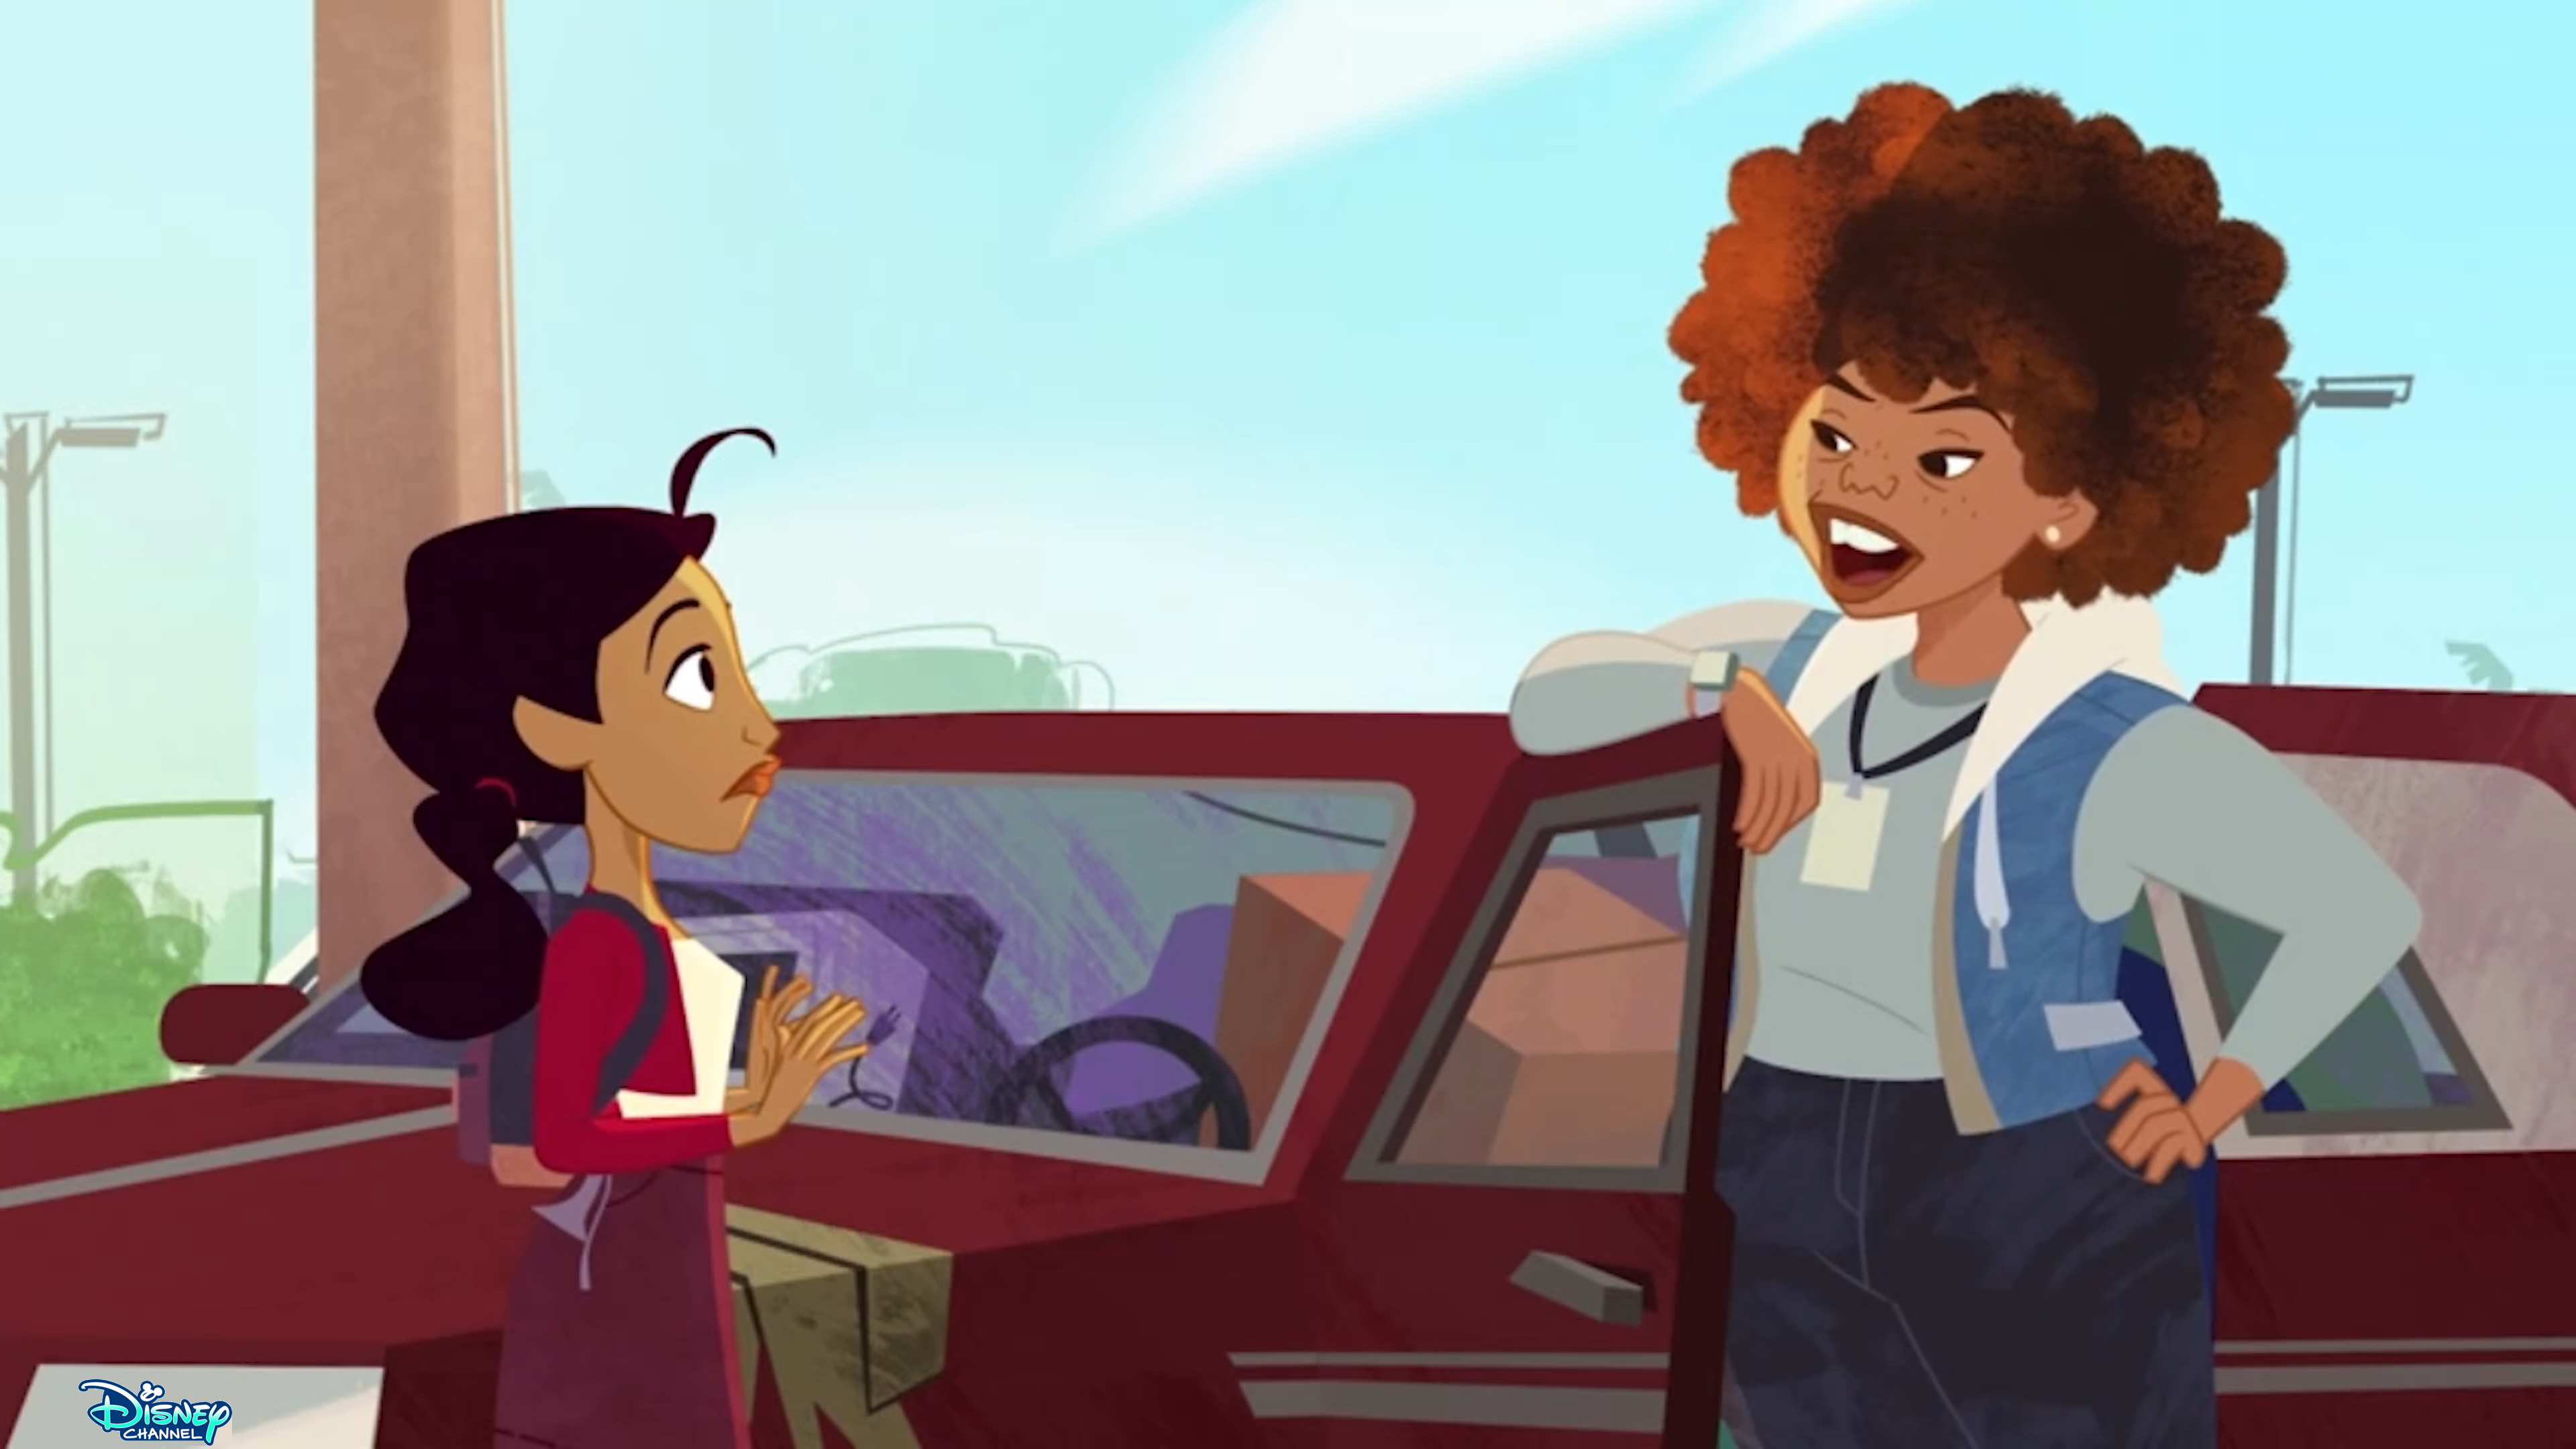  The Proud Family: Louder and Prouder - accueil School Promo Disney Channel 1